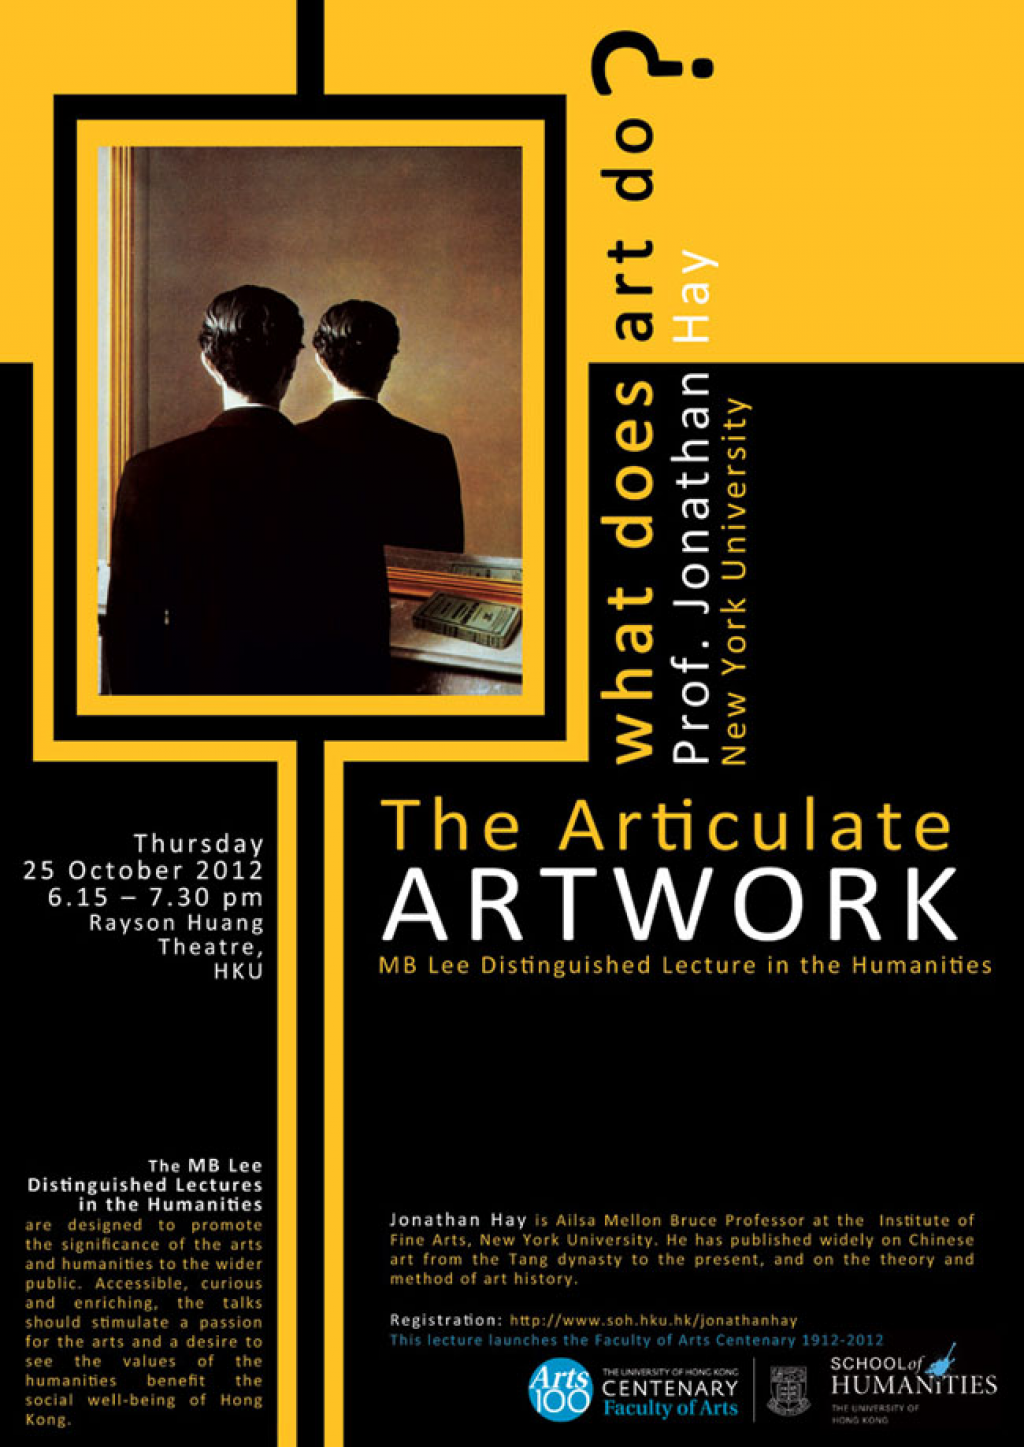 What does Art do? MB Lee Distinguished Lecture in the Humanities 